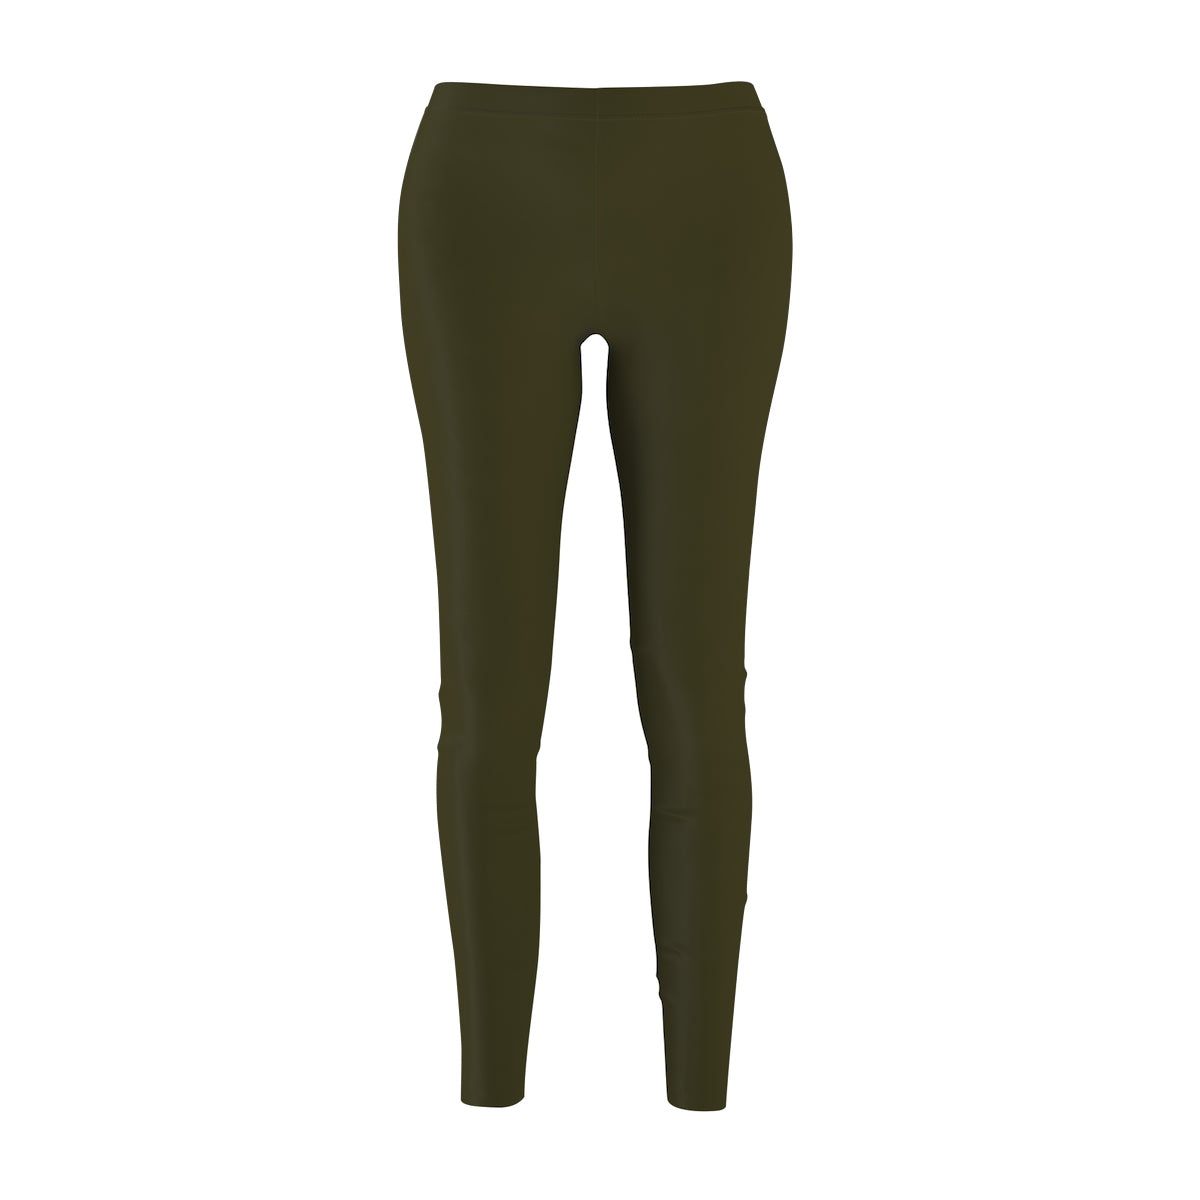 Seaweed Grayish Green Classic Solid Color Women's Casual Leggings-Made in USA-Casual Leggings-M-Heidi Kimura Art LLC Seaweed Green Ladies' Tights, Seaweed Grayish Green Classic Solid Color Modern Essential Skinny Fit Polyester Brushed Suede Soft and Comfy Premium Quality Women's Casual Leggings-Made in USA (US Size: XS-2XL)